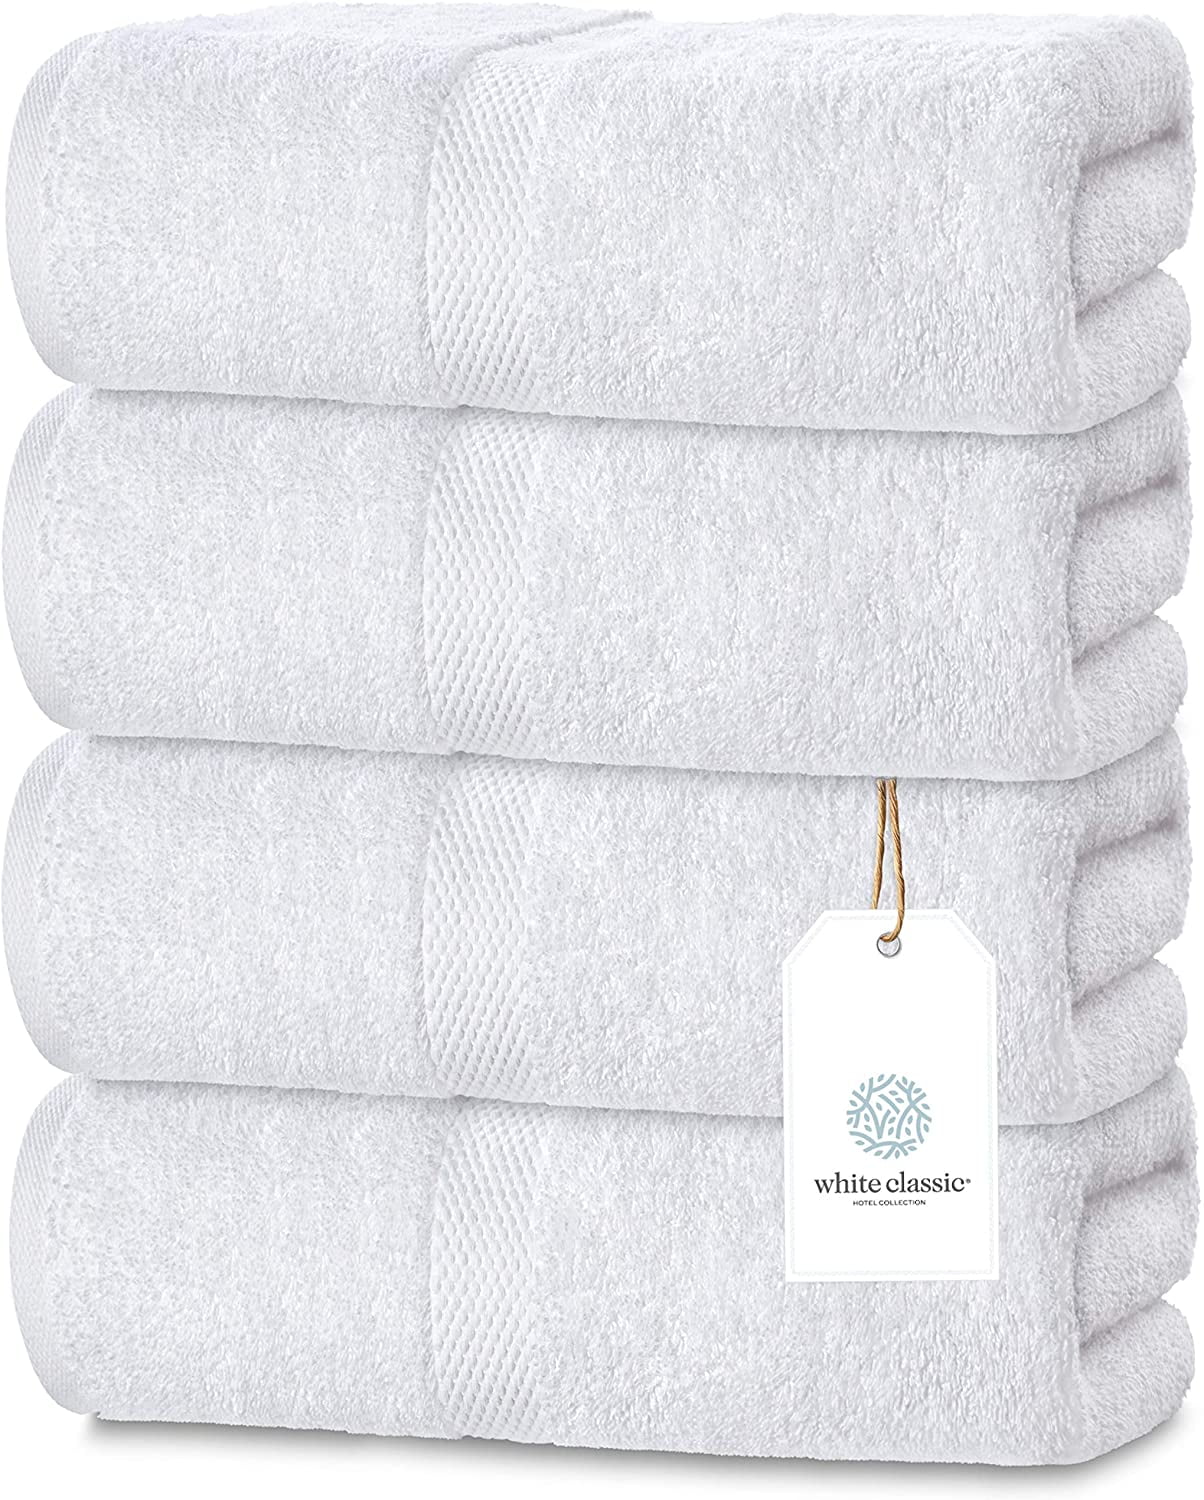 Extra Large 80x180cm White Cotton Hotel Towels For Sale With